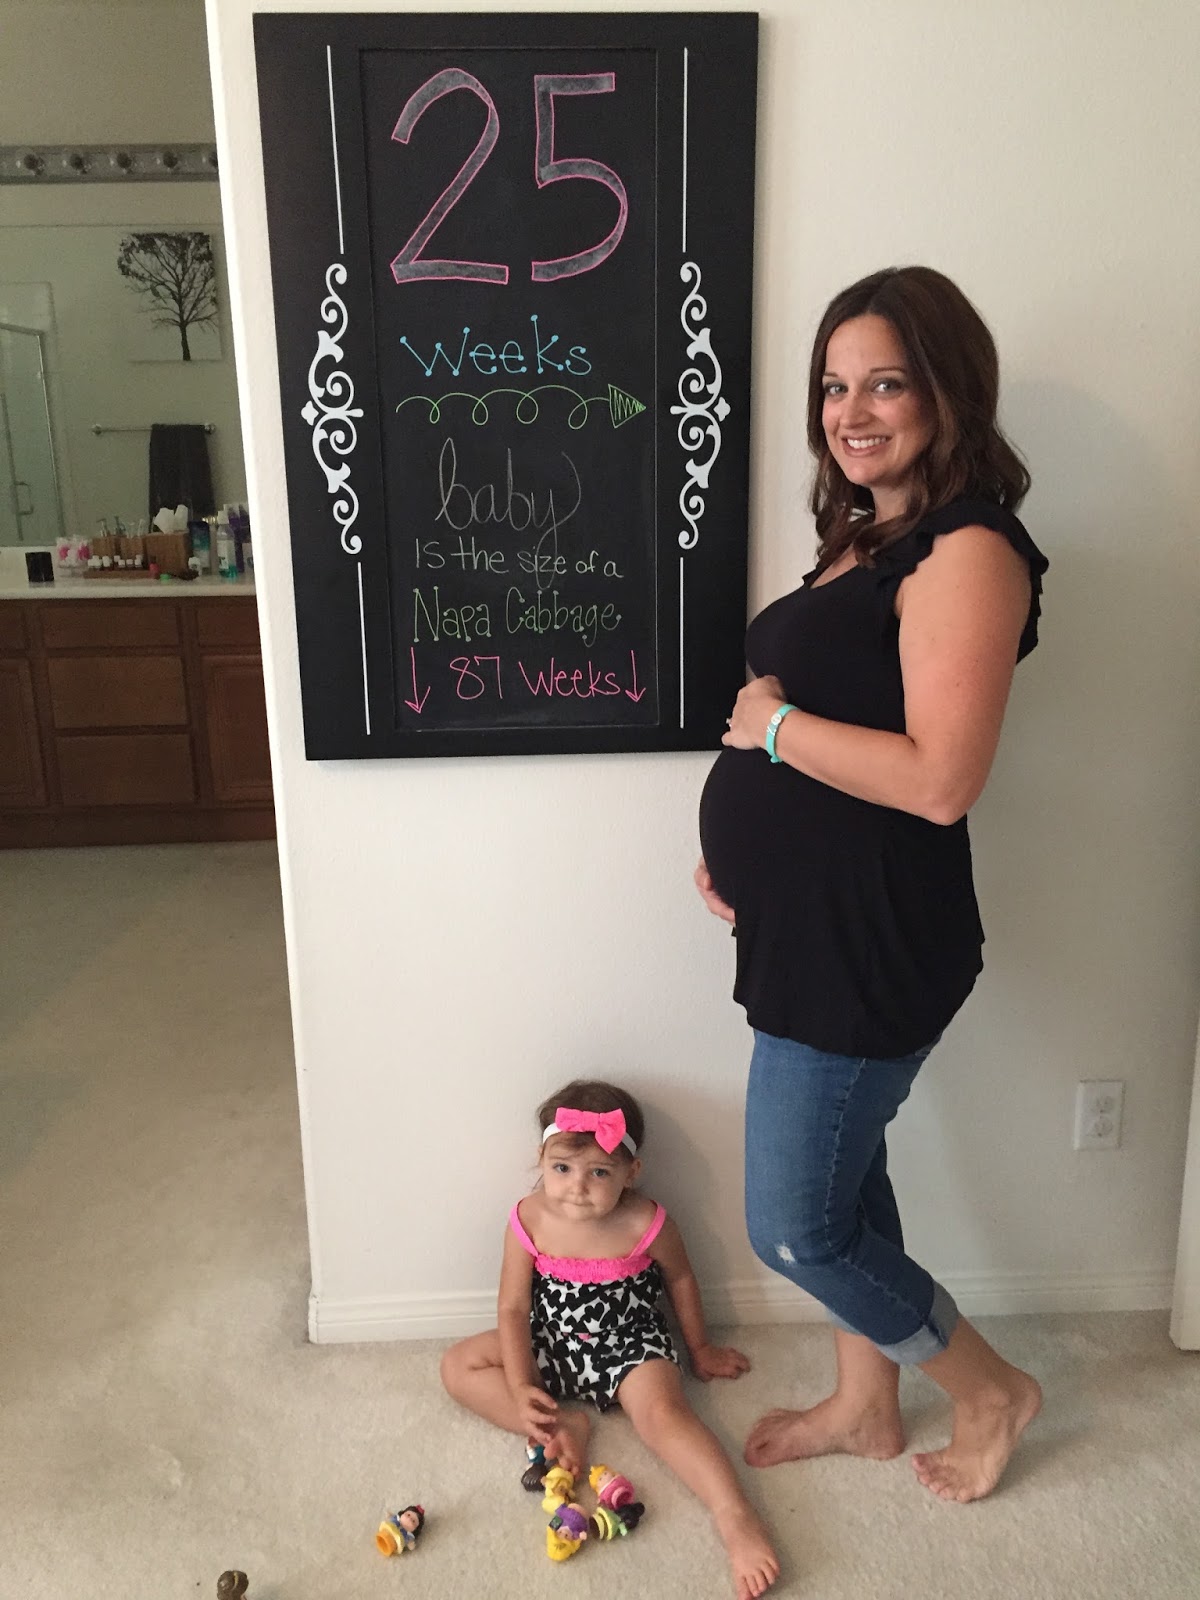 A Little Moore: 25 Weeks - Baby is the Size of a Napa Cabbage
 25 Weeks Pregnant Baby Size